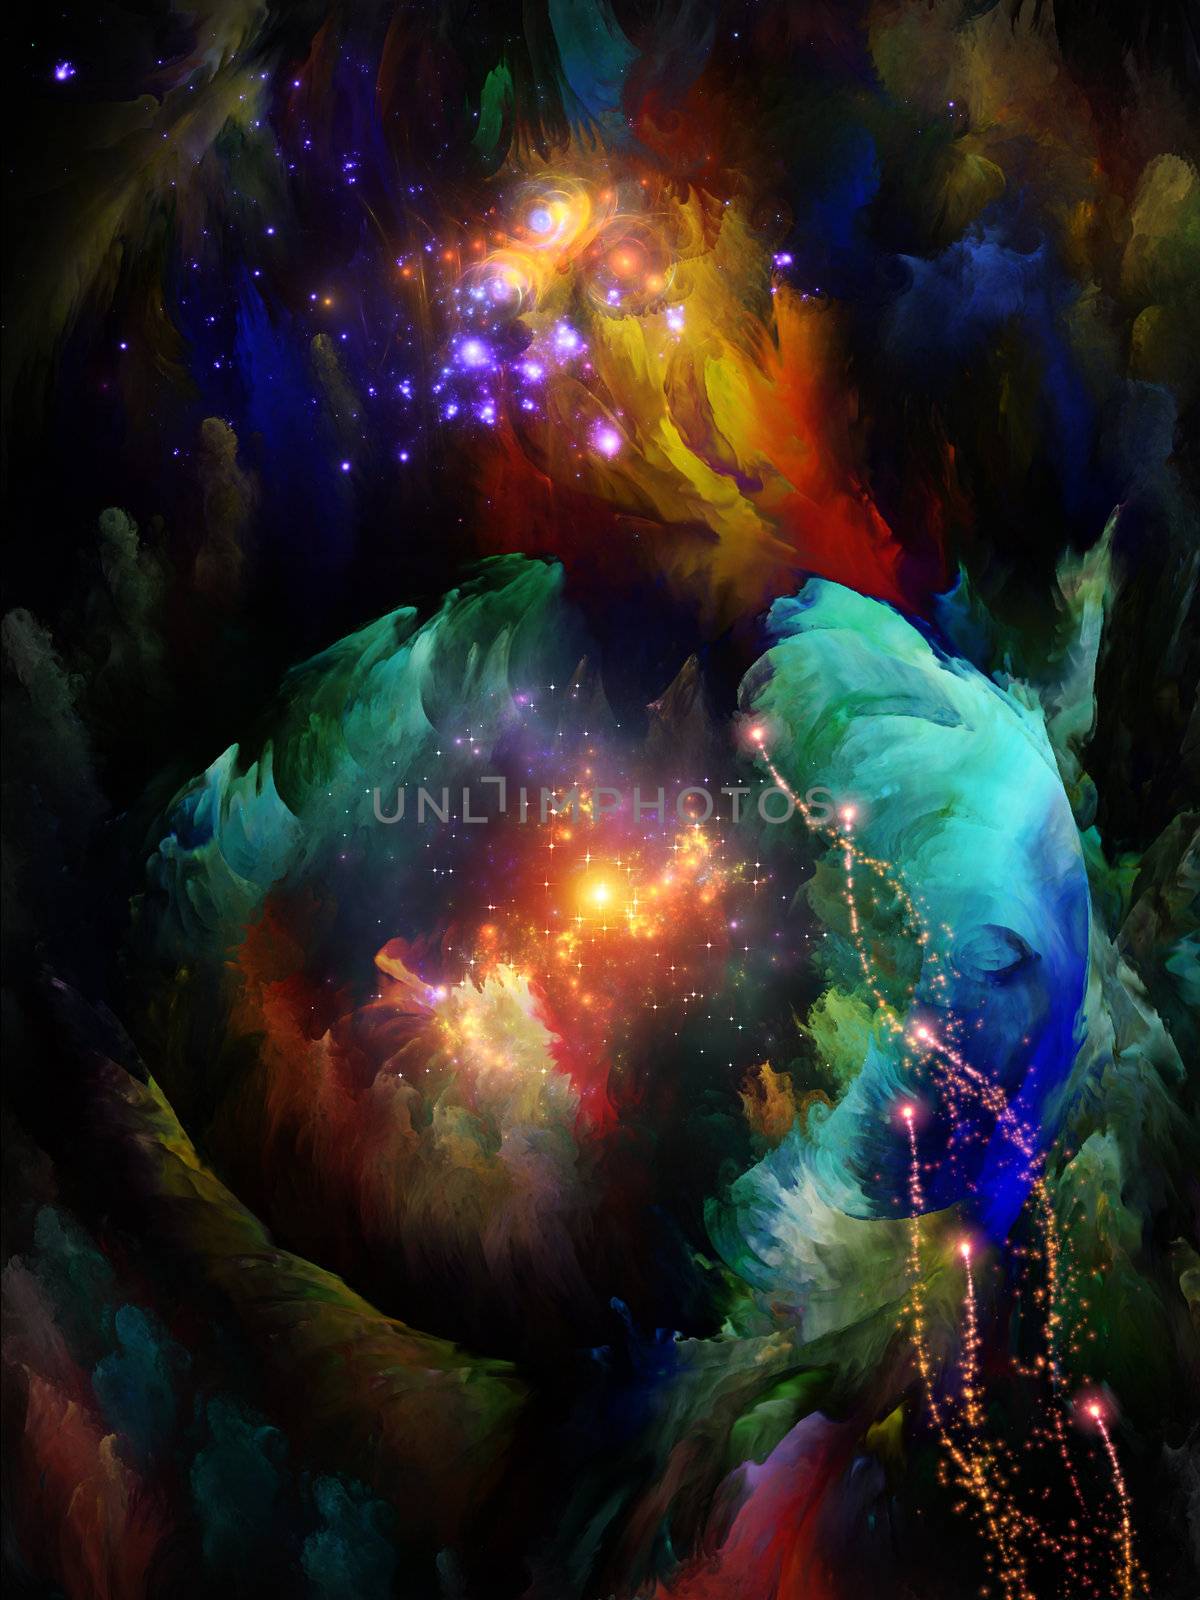 Never Worlds series. Design composed of colorful dimensional fractal worlds as a metaphor on the subject of fantasy, dreams, creativity,  imagination and art